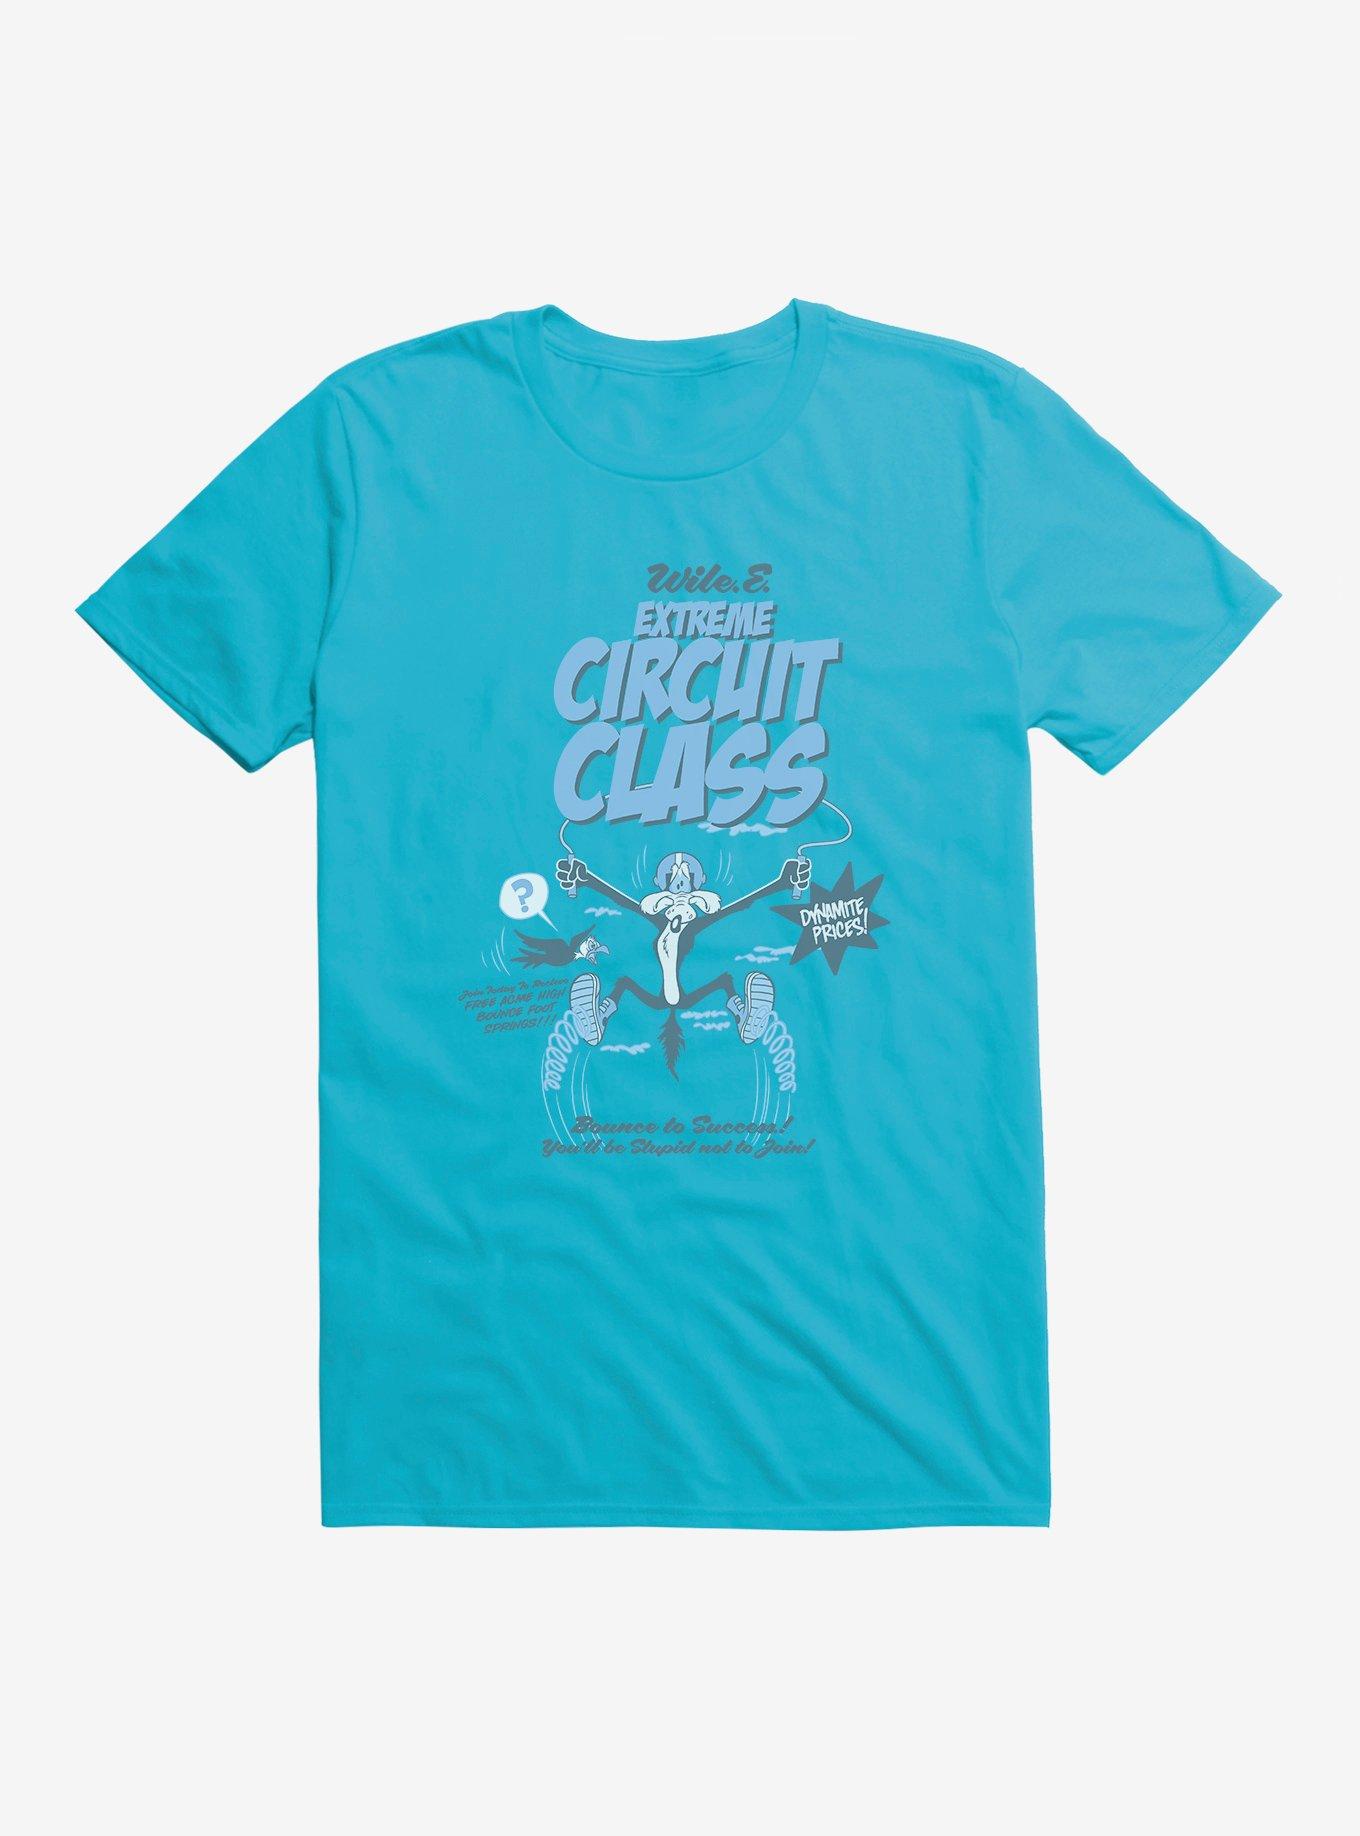 Looney Tunes Wile E. Extreme Circuit Class T-Shirt | Hot Topic